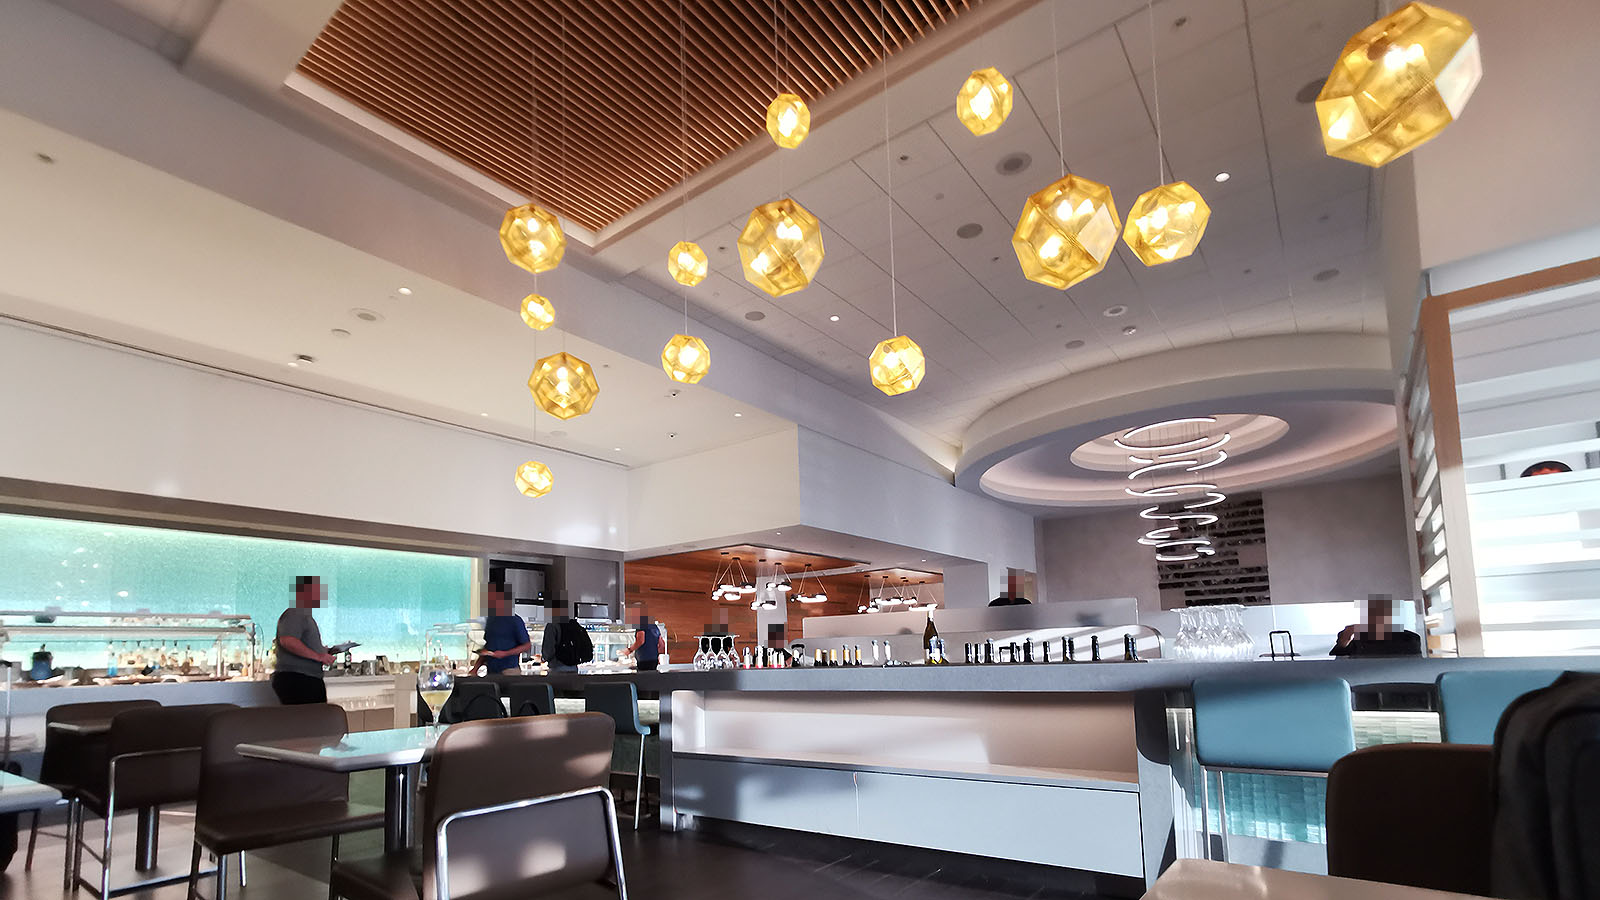 American Airlines Flagship Lounge, Dallas Fort Worth